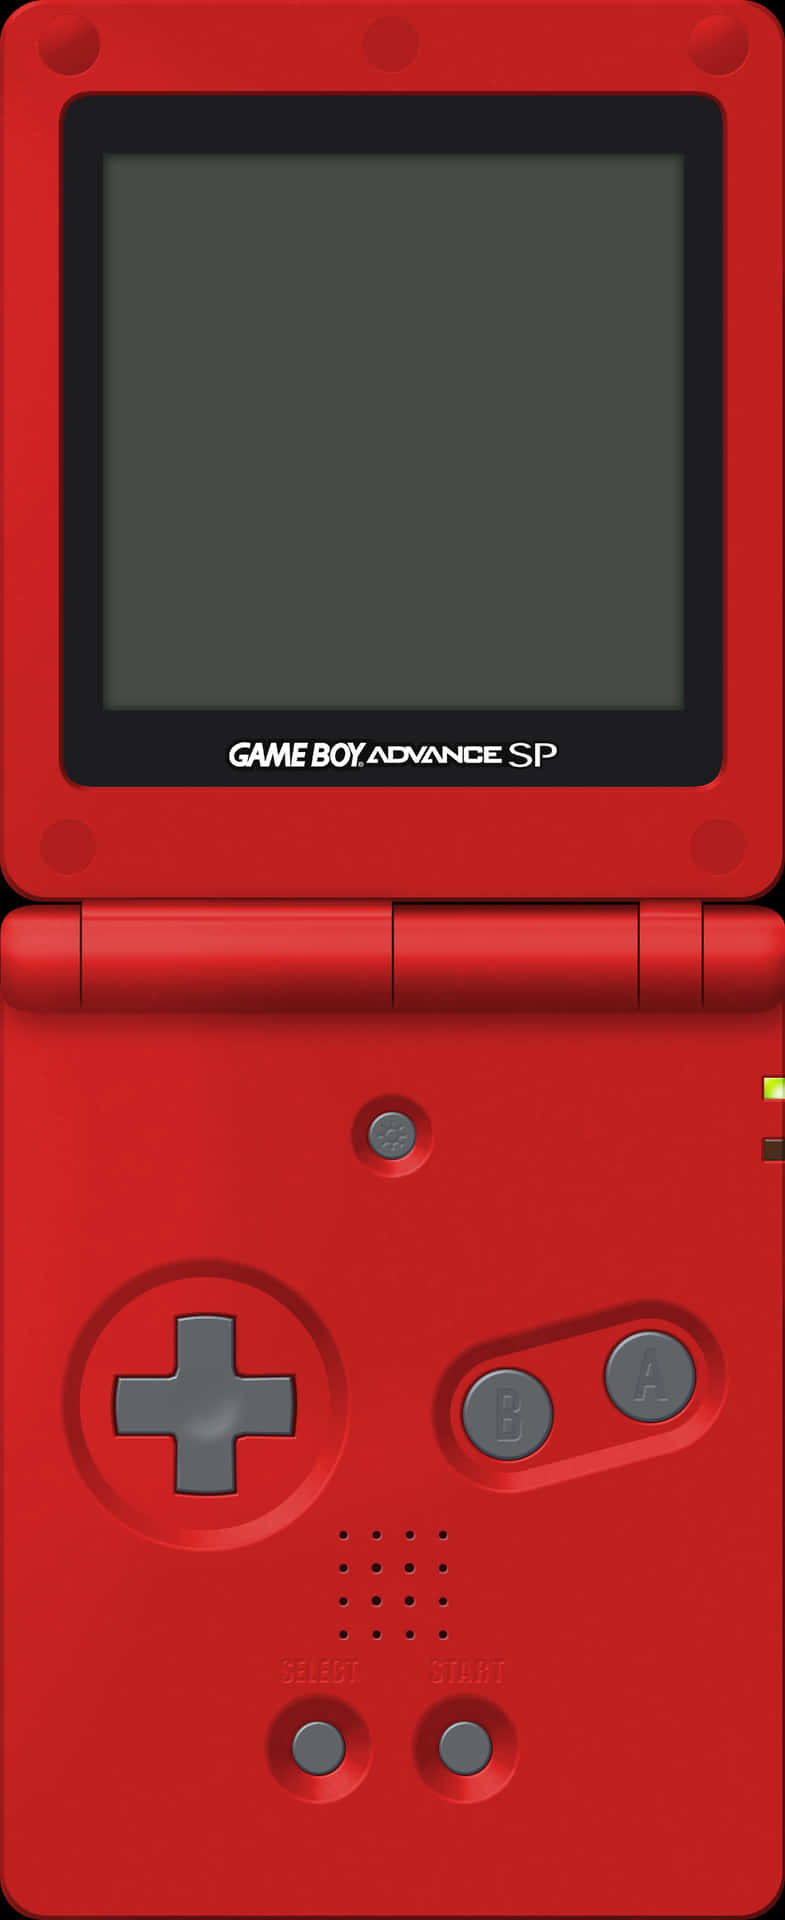 Red Gameboy Advance S P Wallpaper